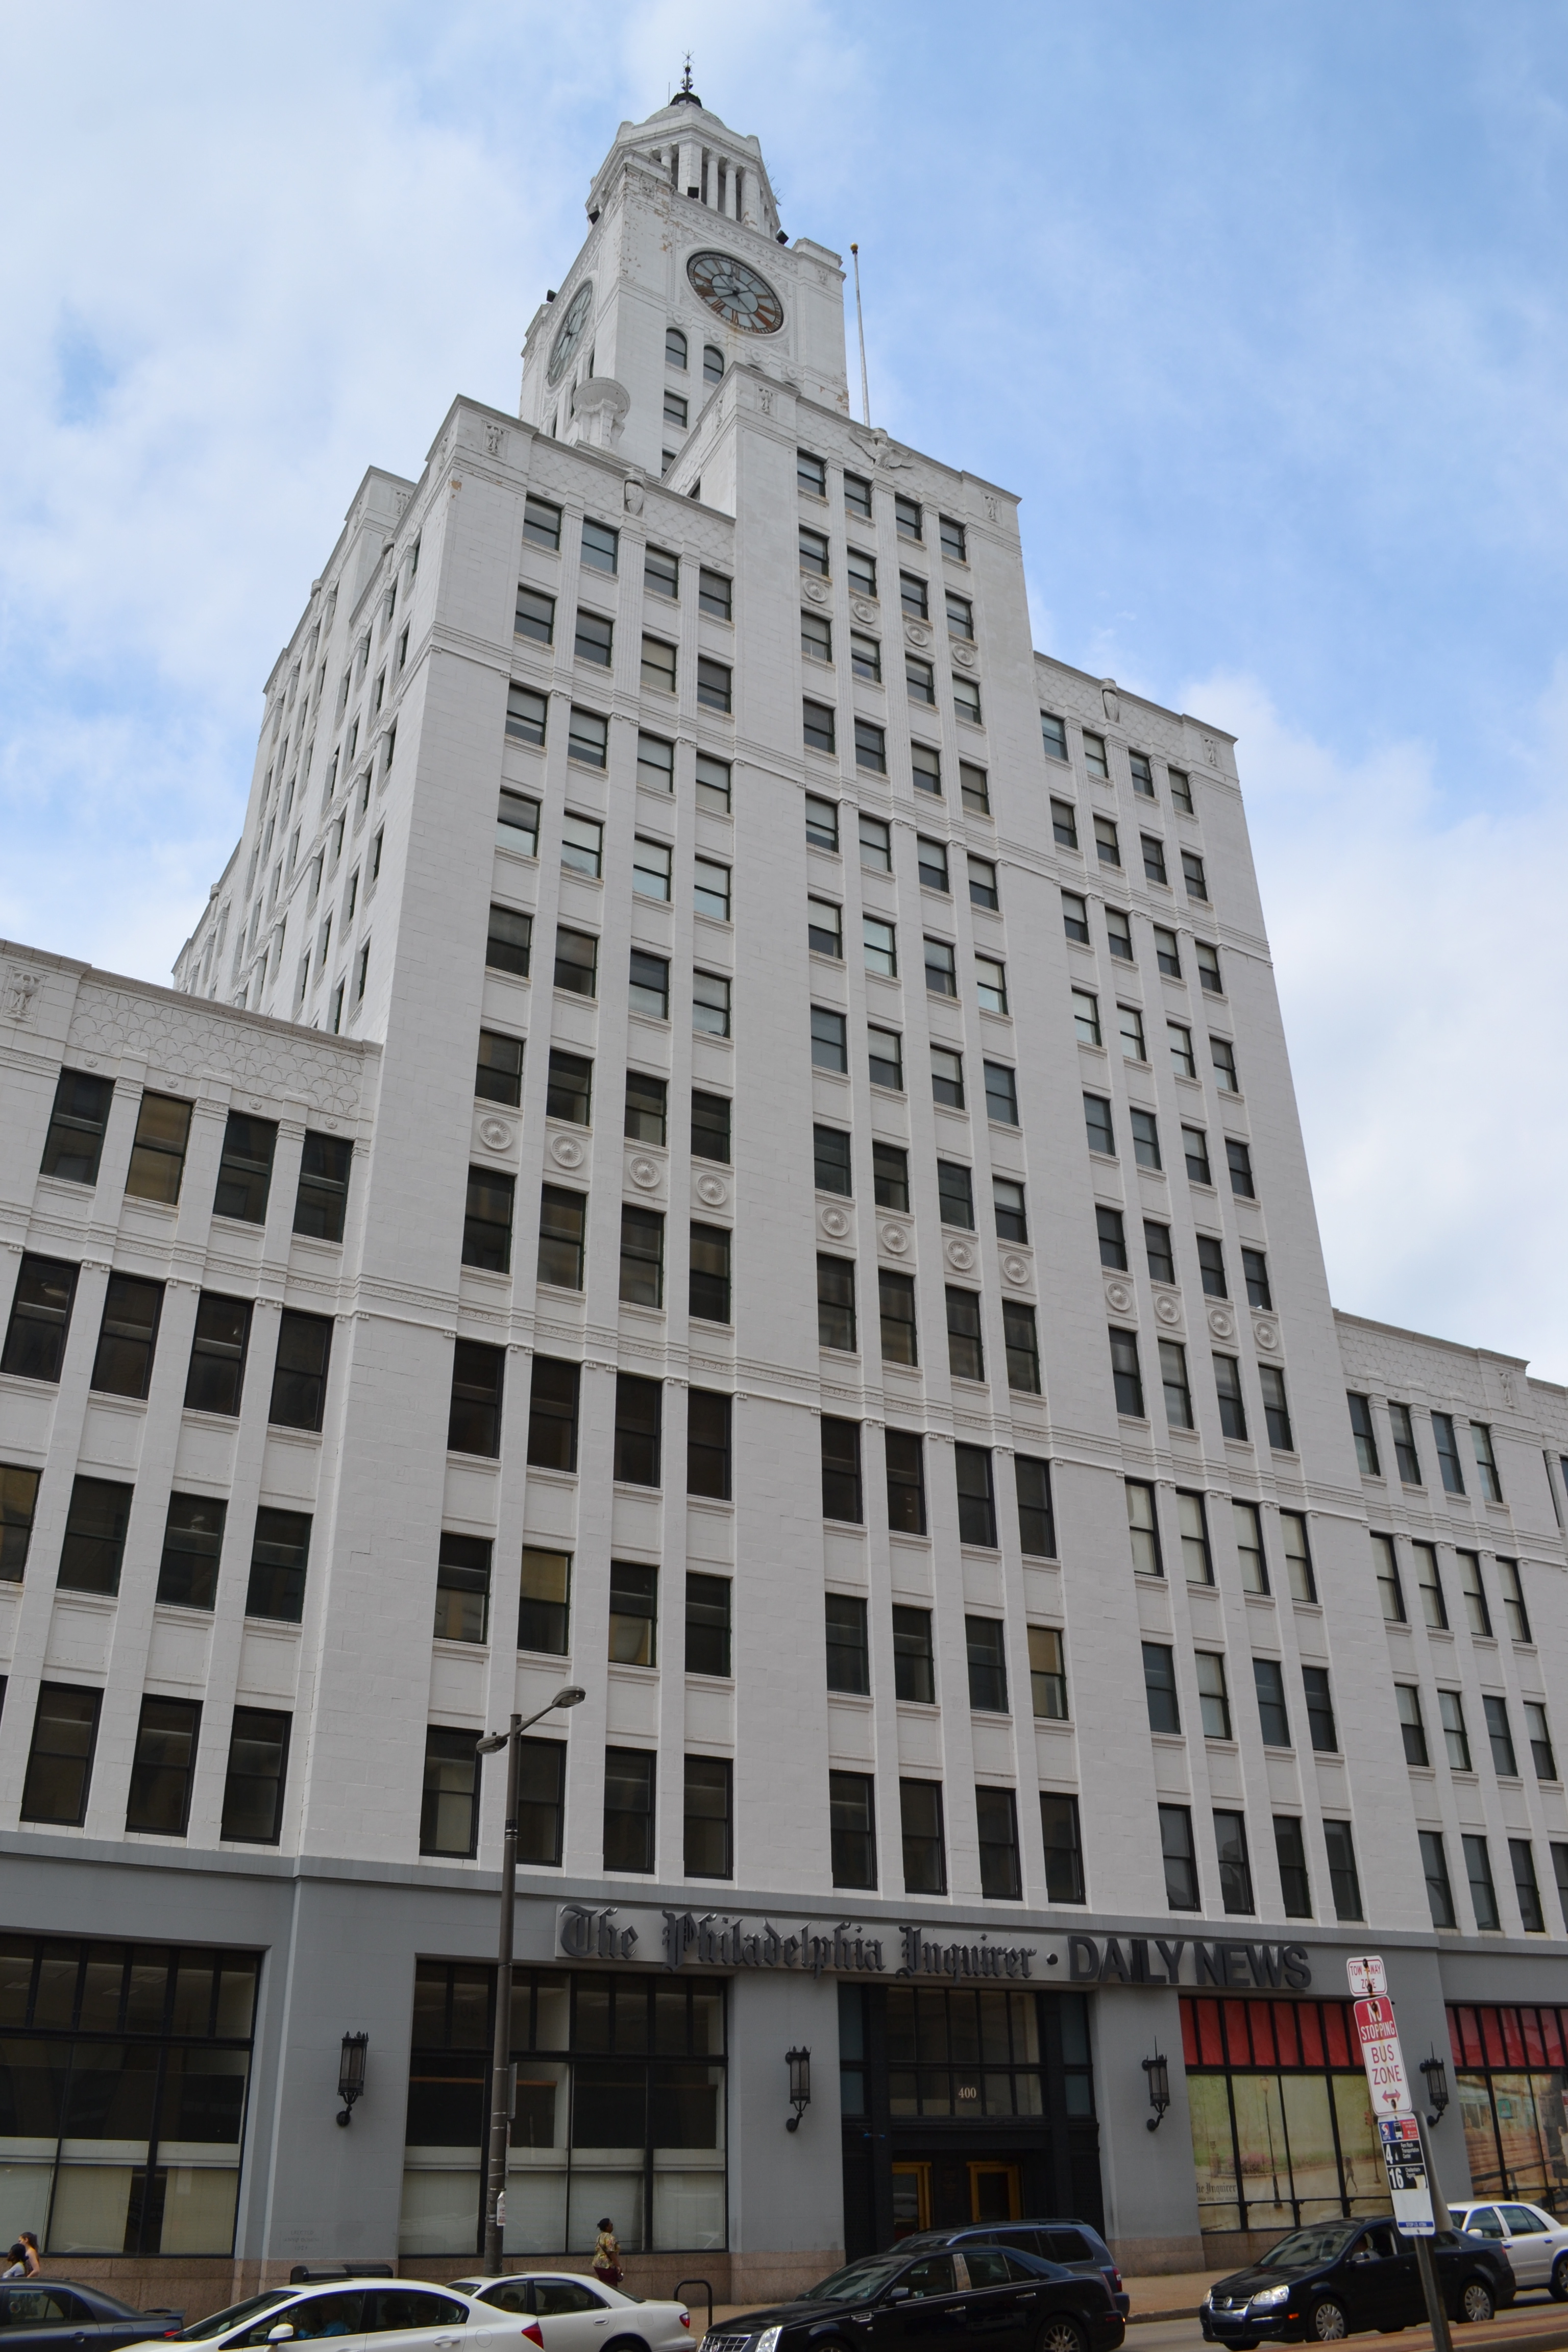 The former Inquirer building sits just west of the bridge at 400 N. Broad Street